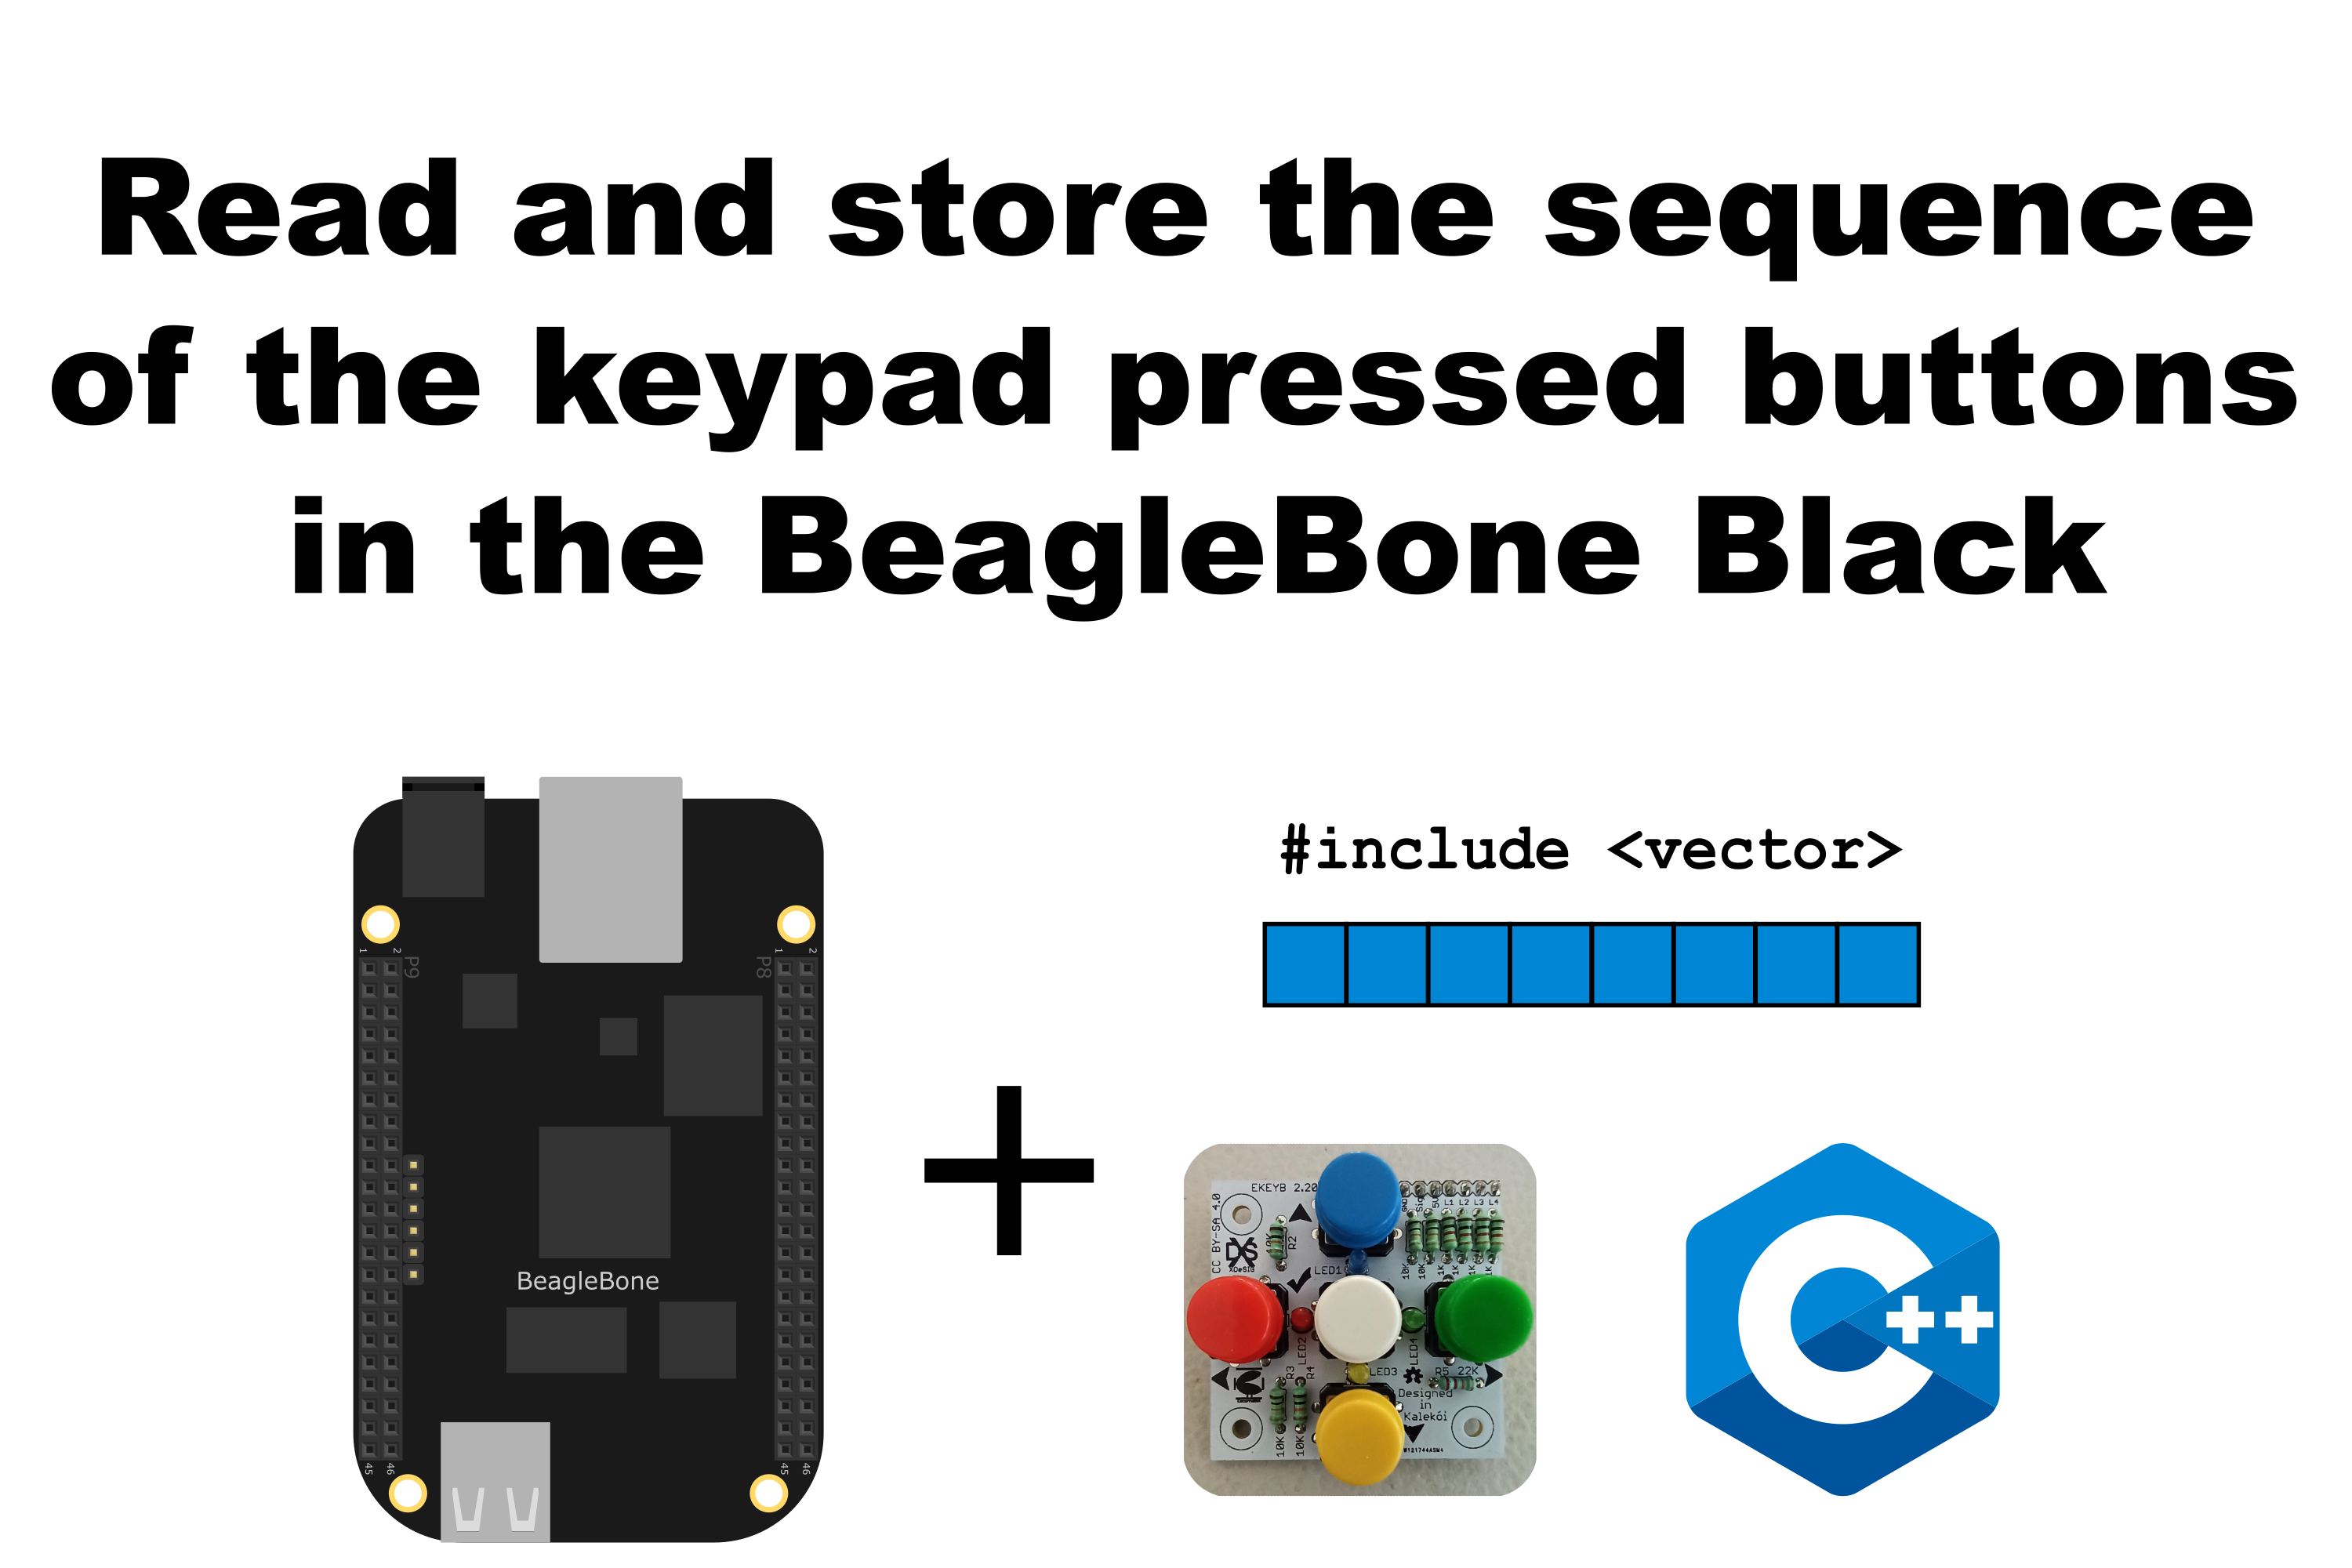 Read and store the sequence of the keypad pressed buttons in the BeagleBone Black